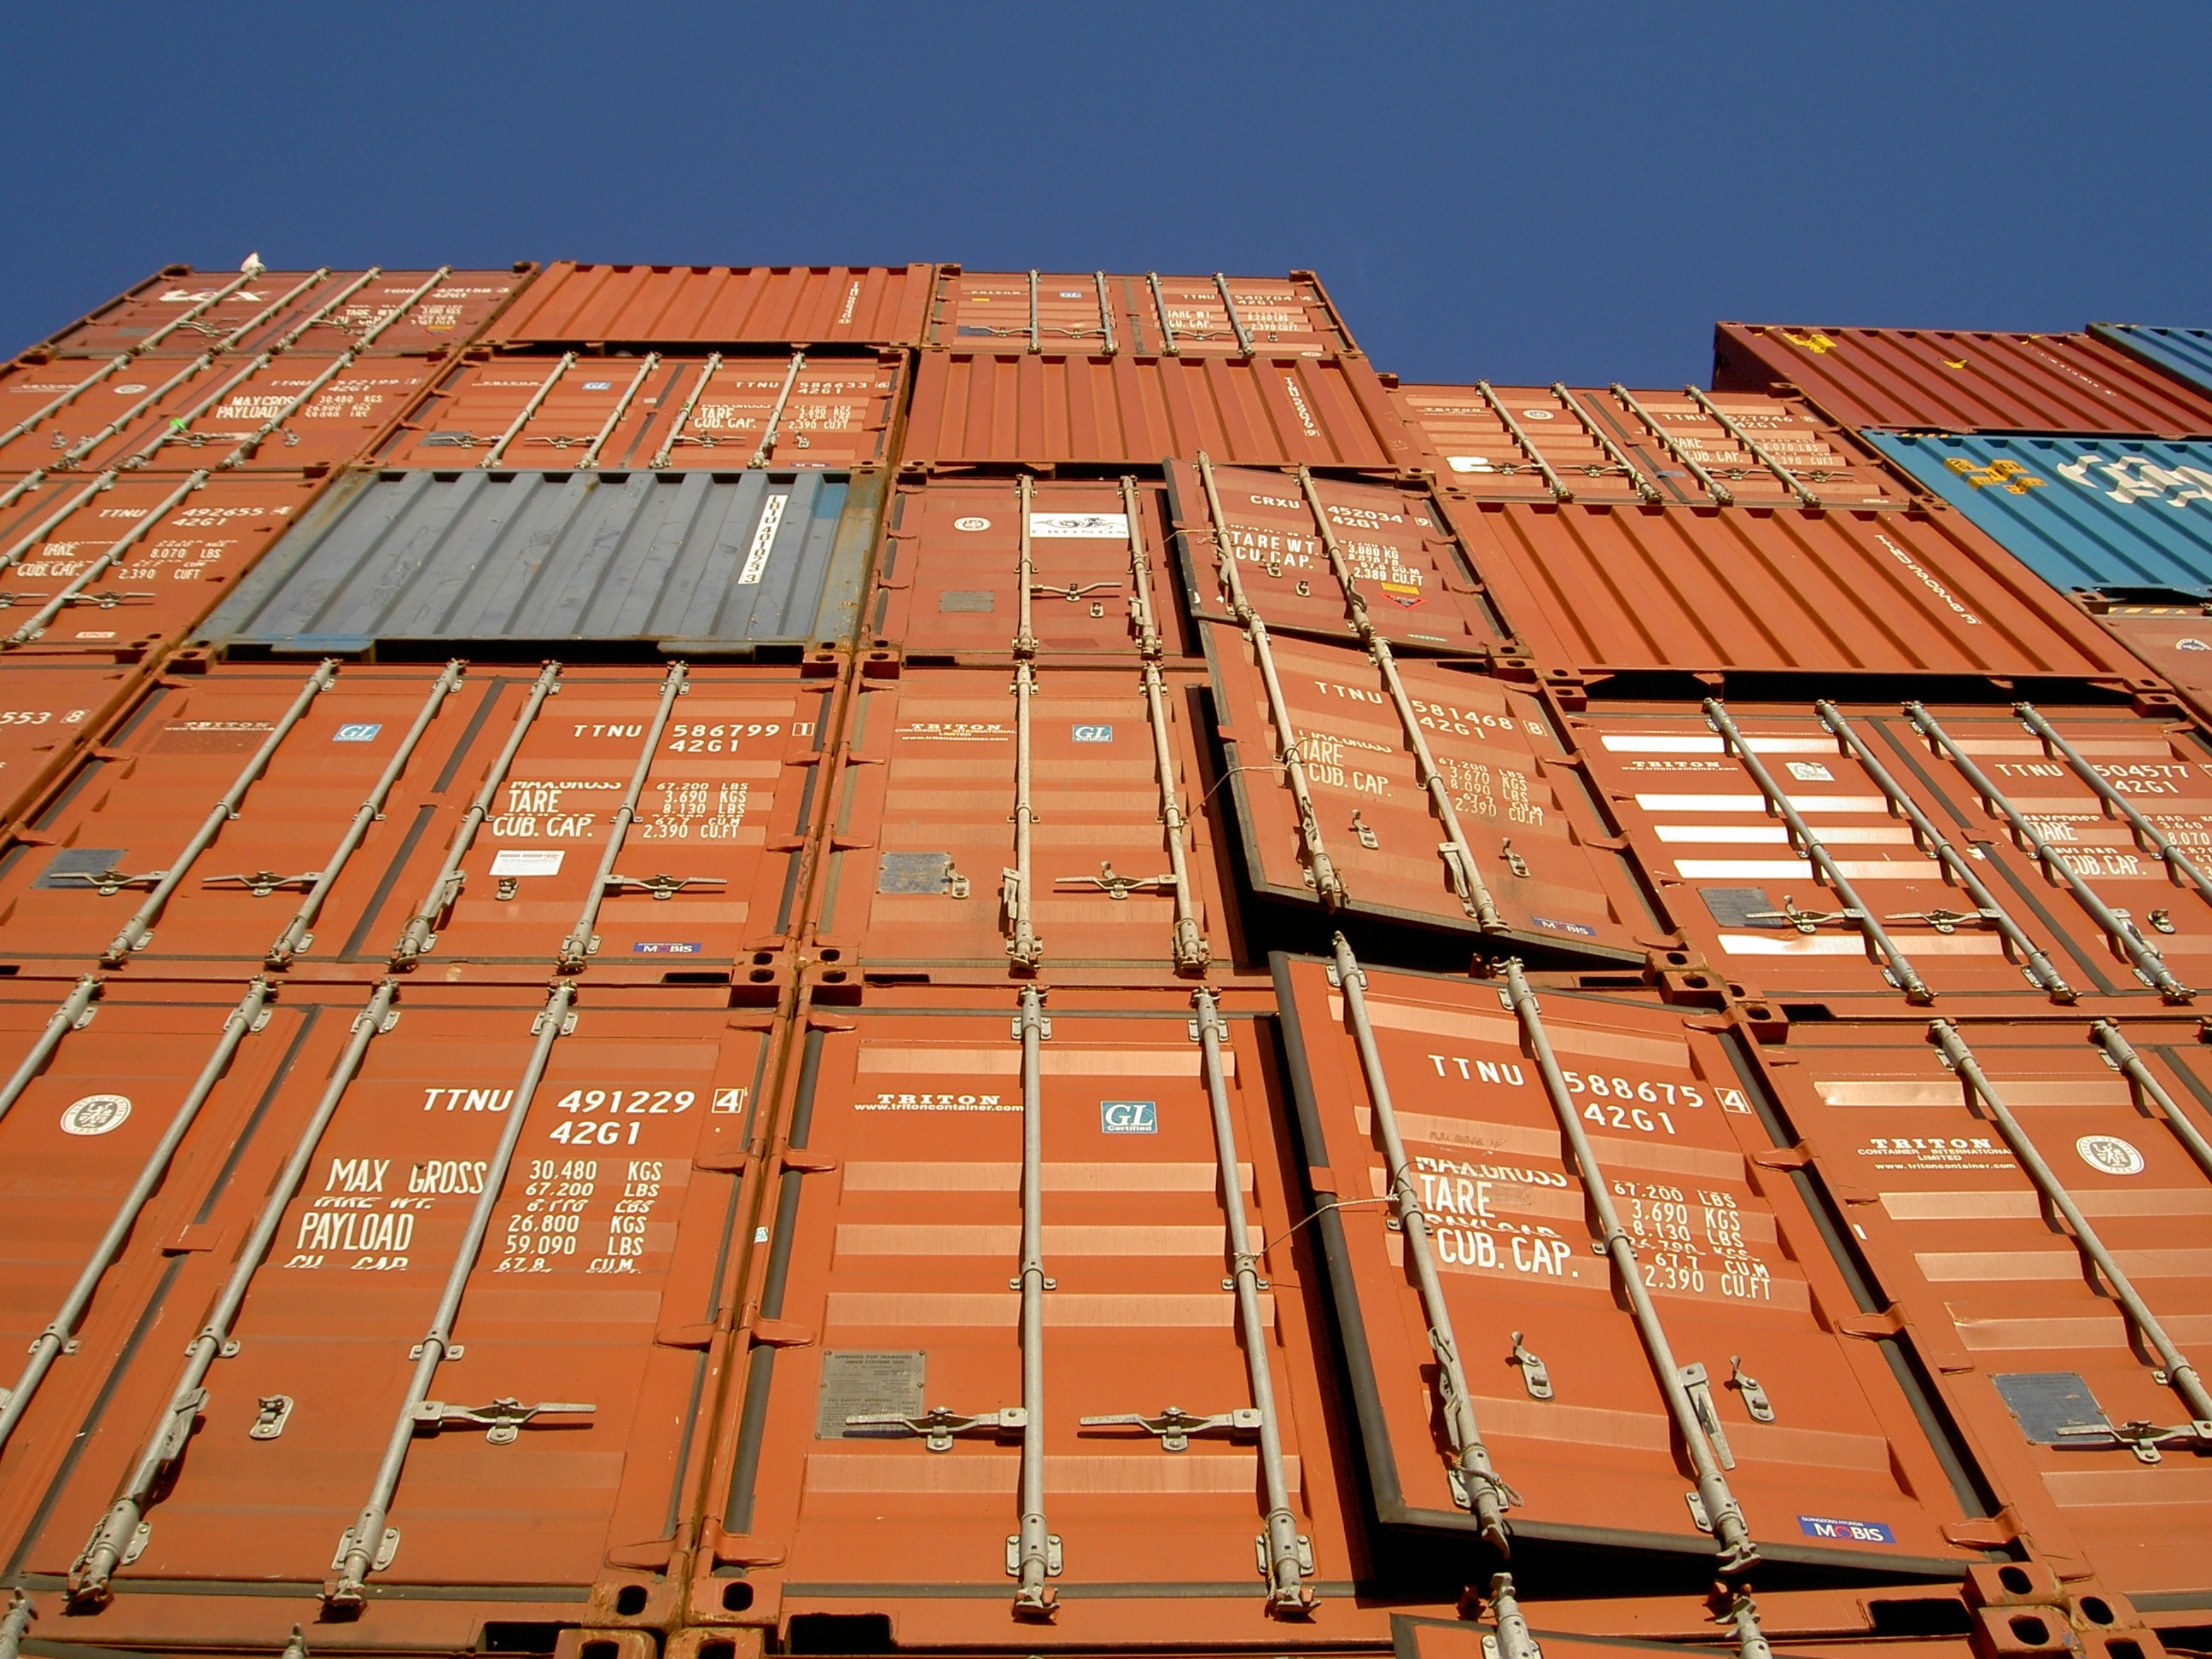 Metal, Containers, Crates, Shipping, sky, outdoors